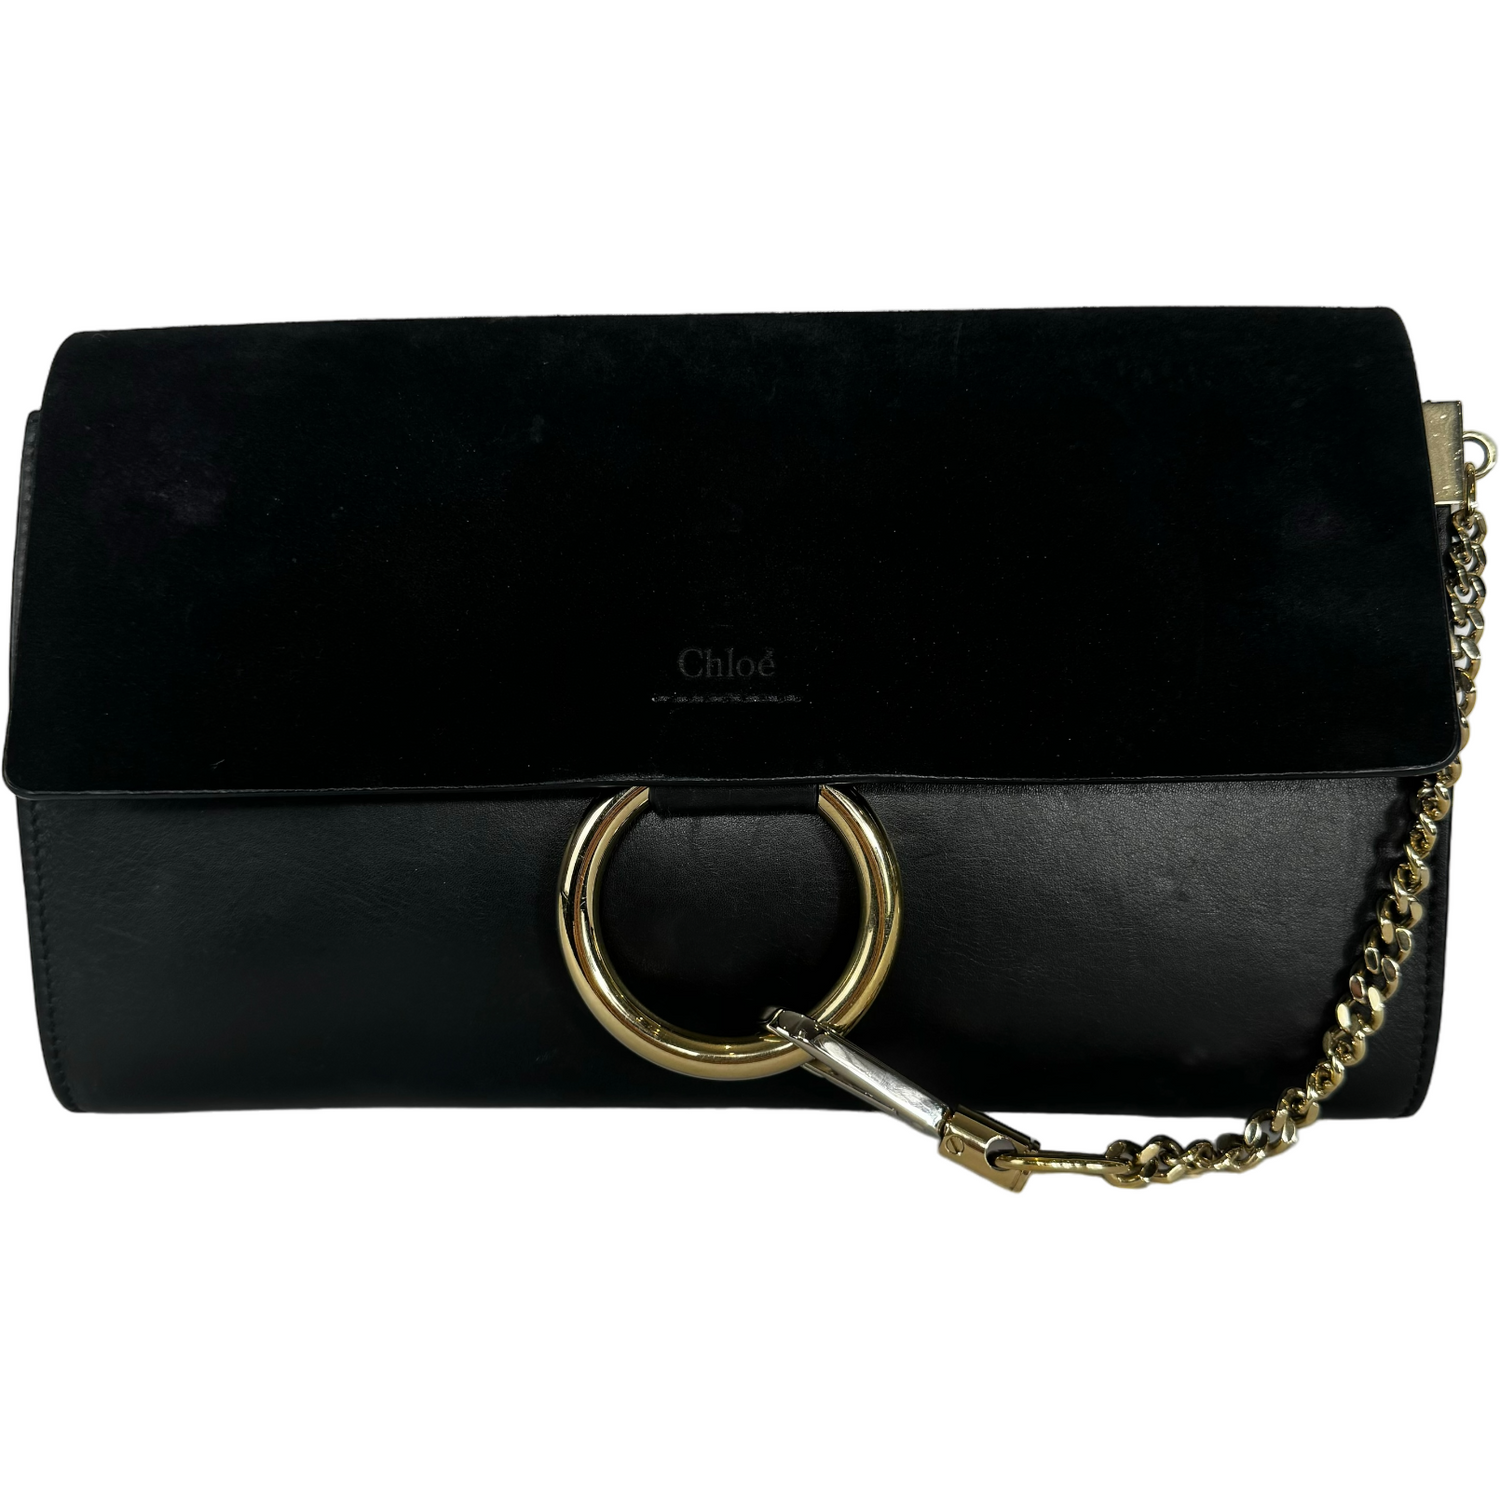 CHLOE Faye black leather and suede signature clutch bag